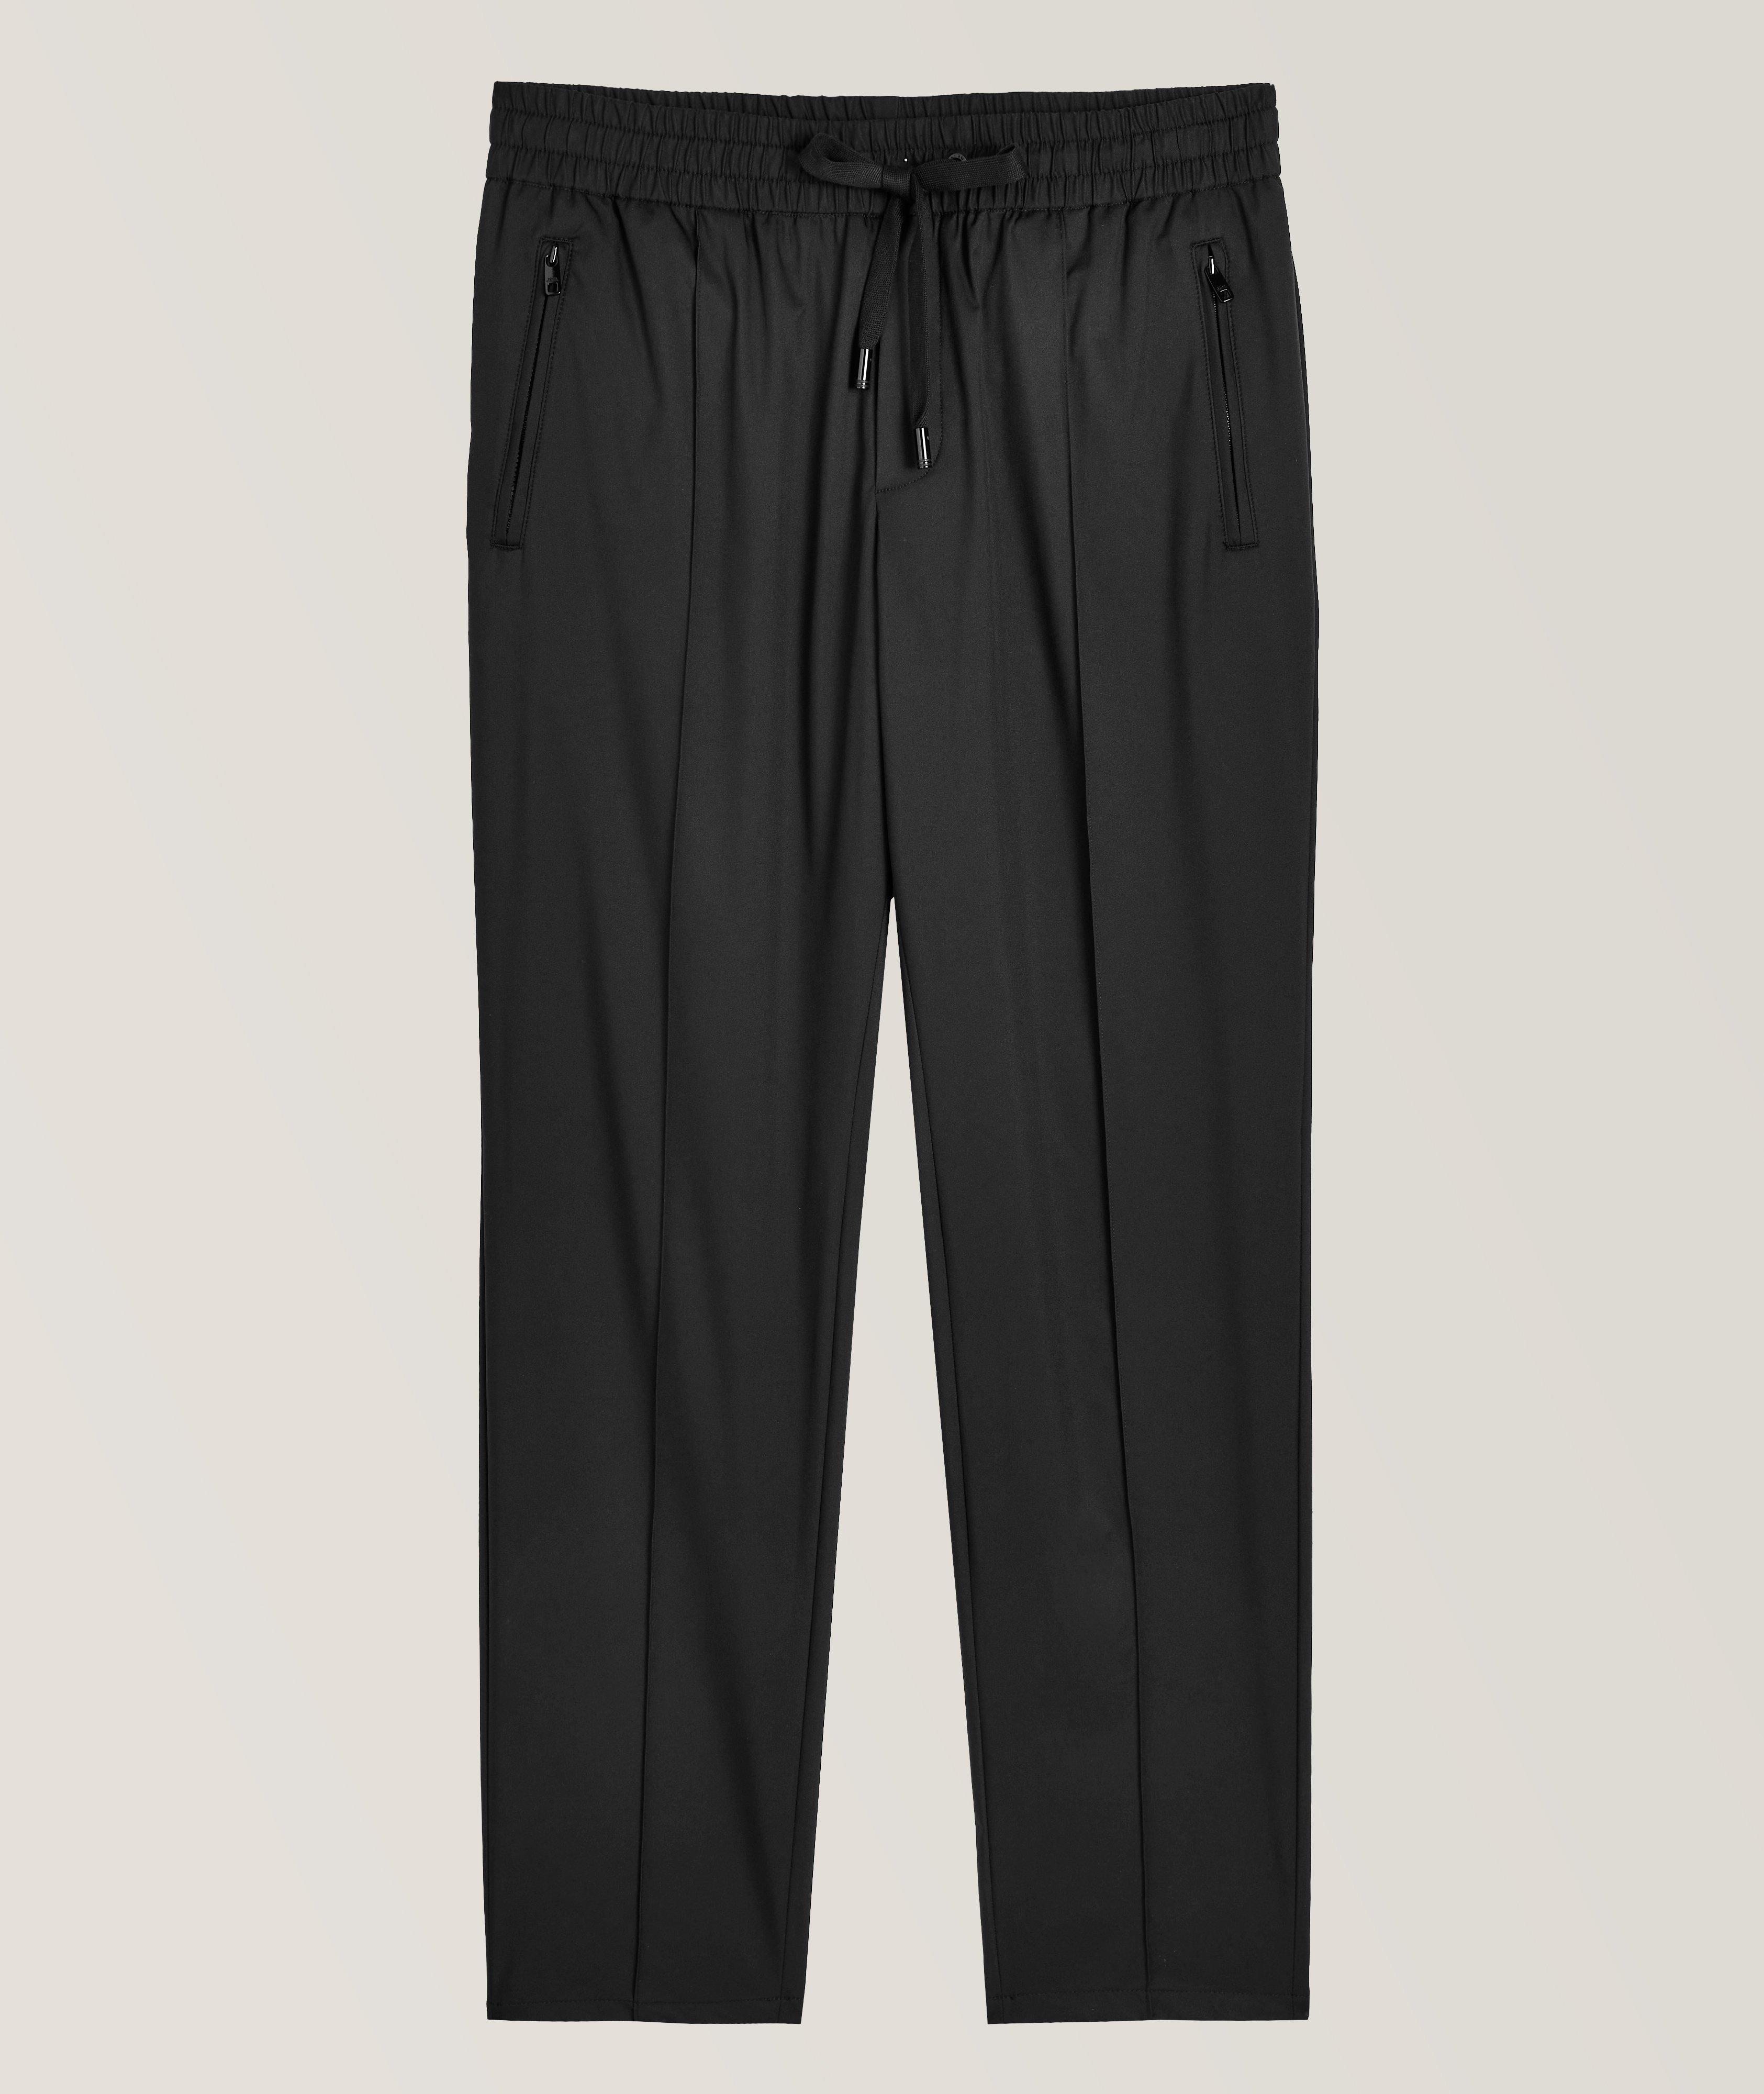 Essential Collection Nylon Drawstring Pants image 0